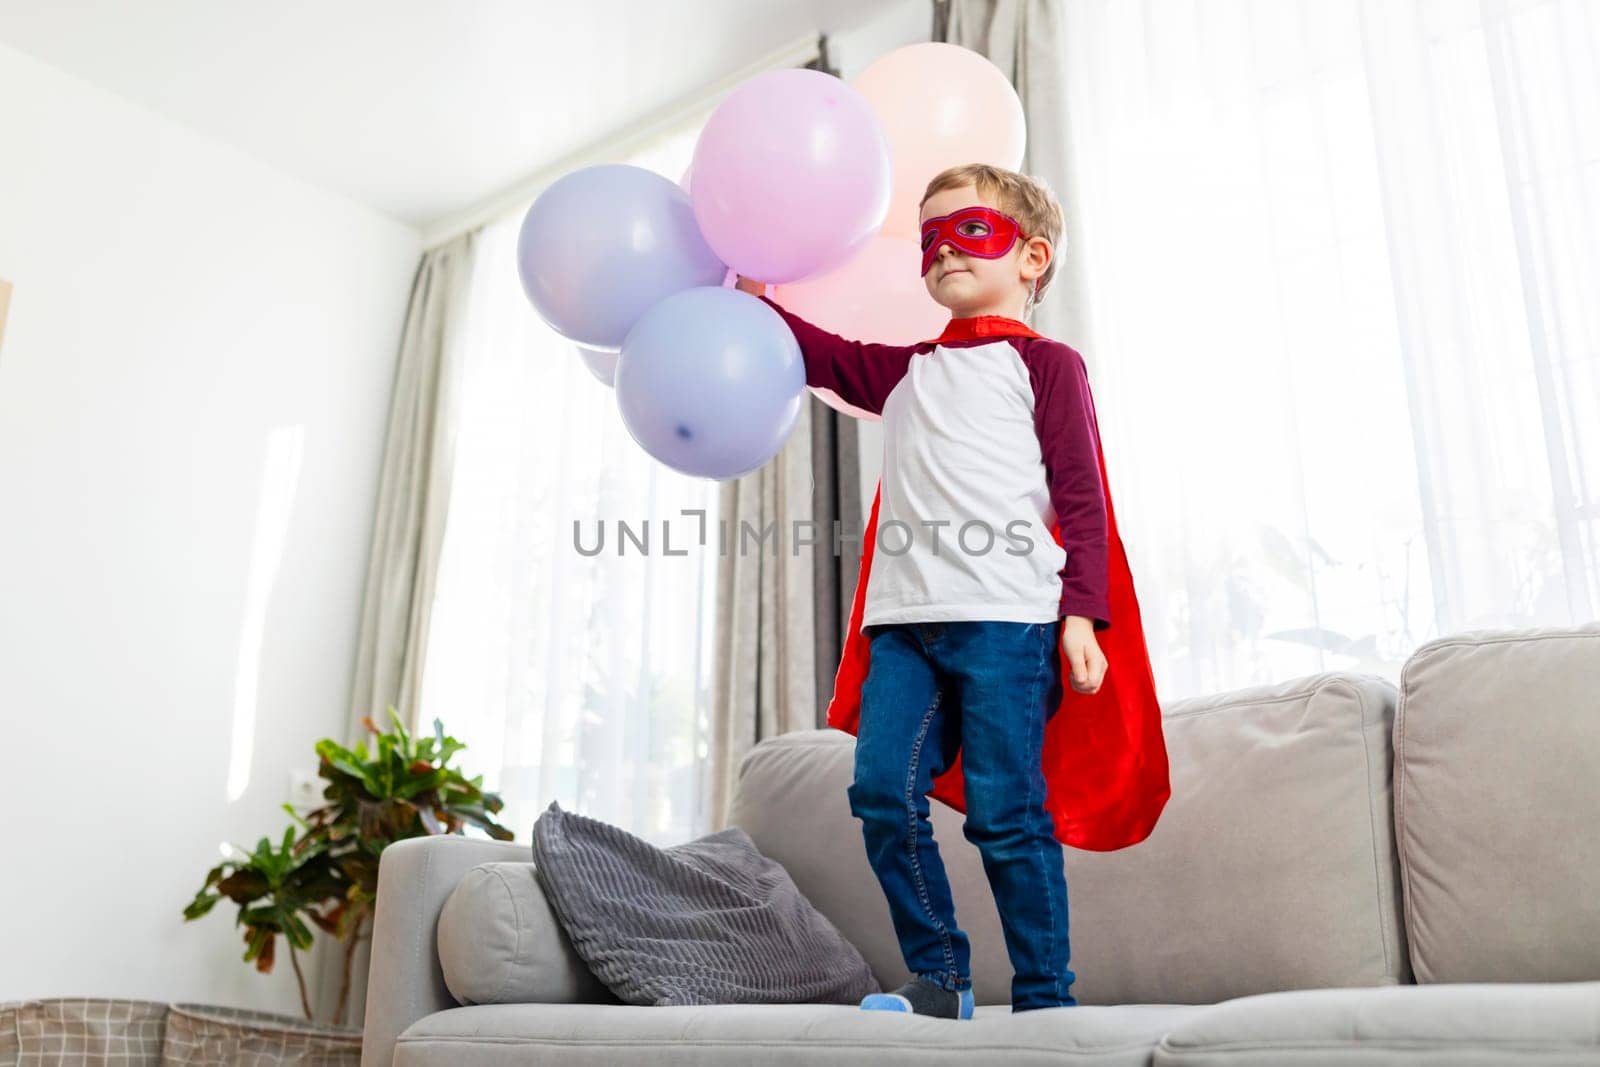 Boy in superhero costume with balloons standing on sofa. Indoor childhood play and imagination concept for design and print